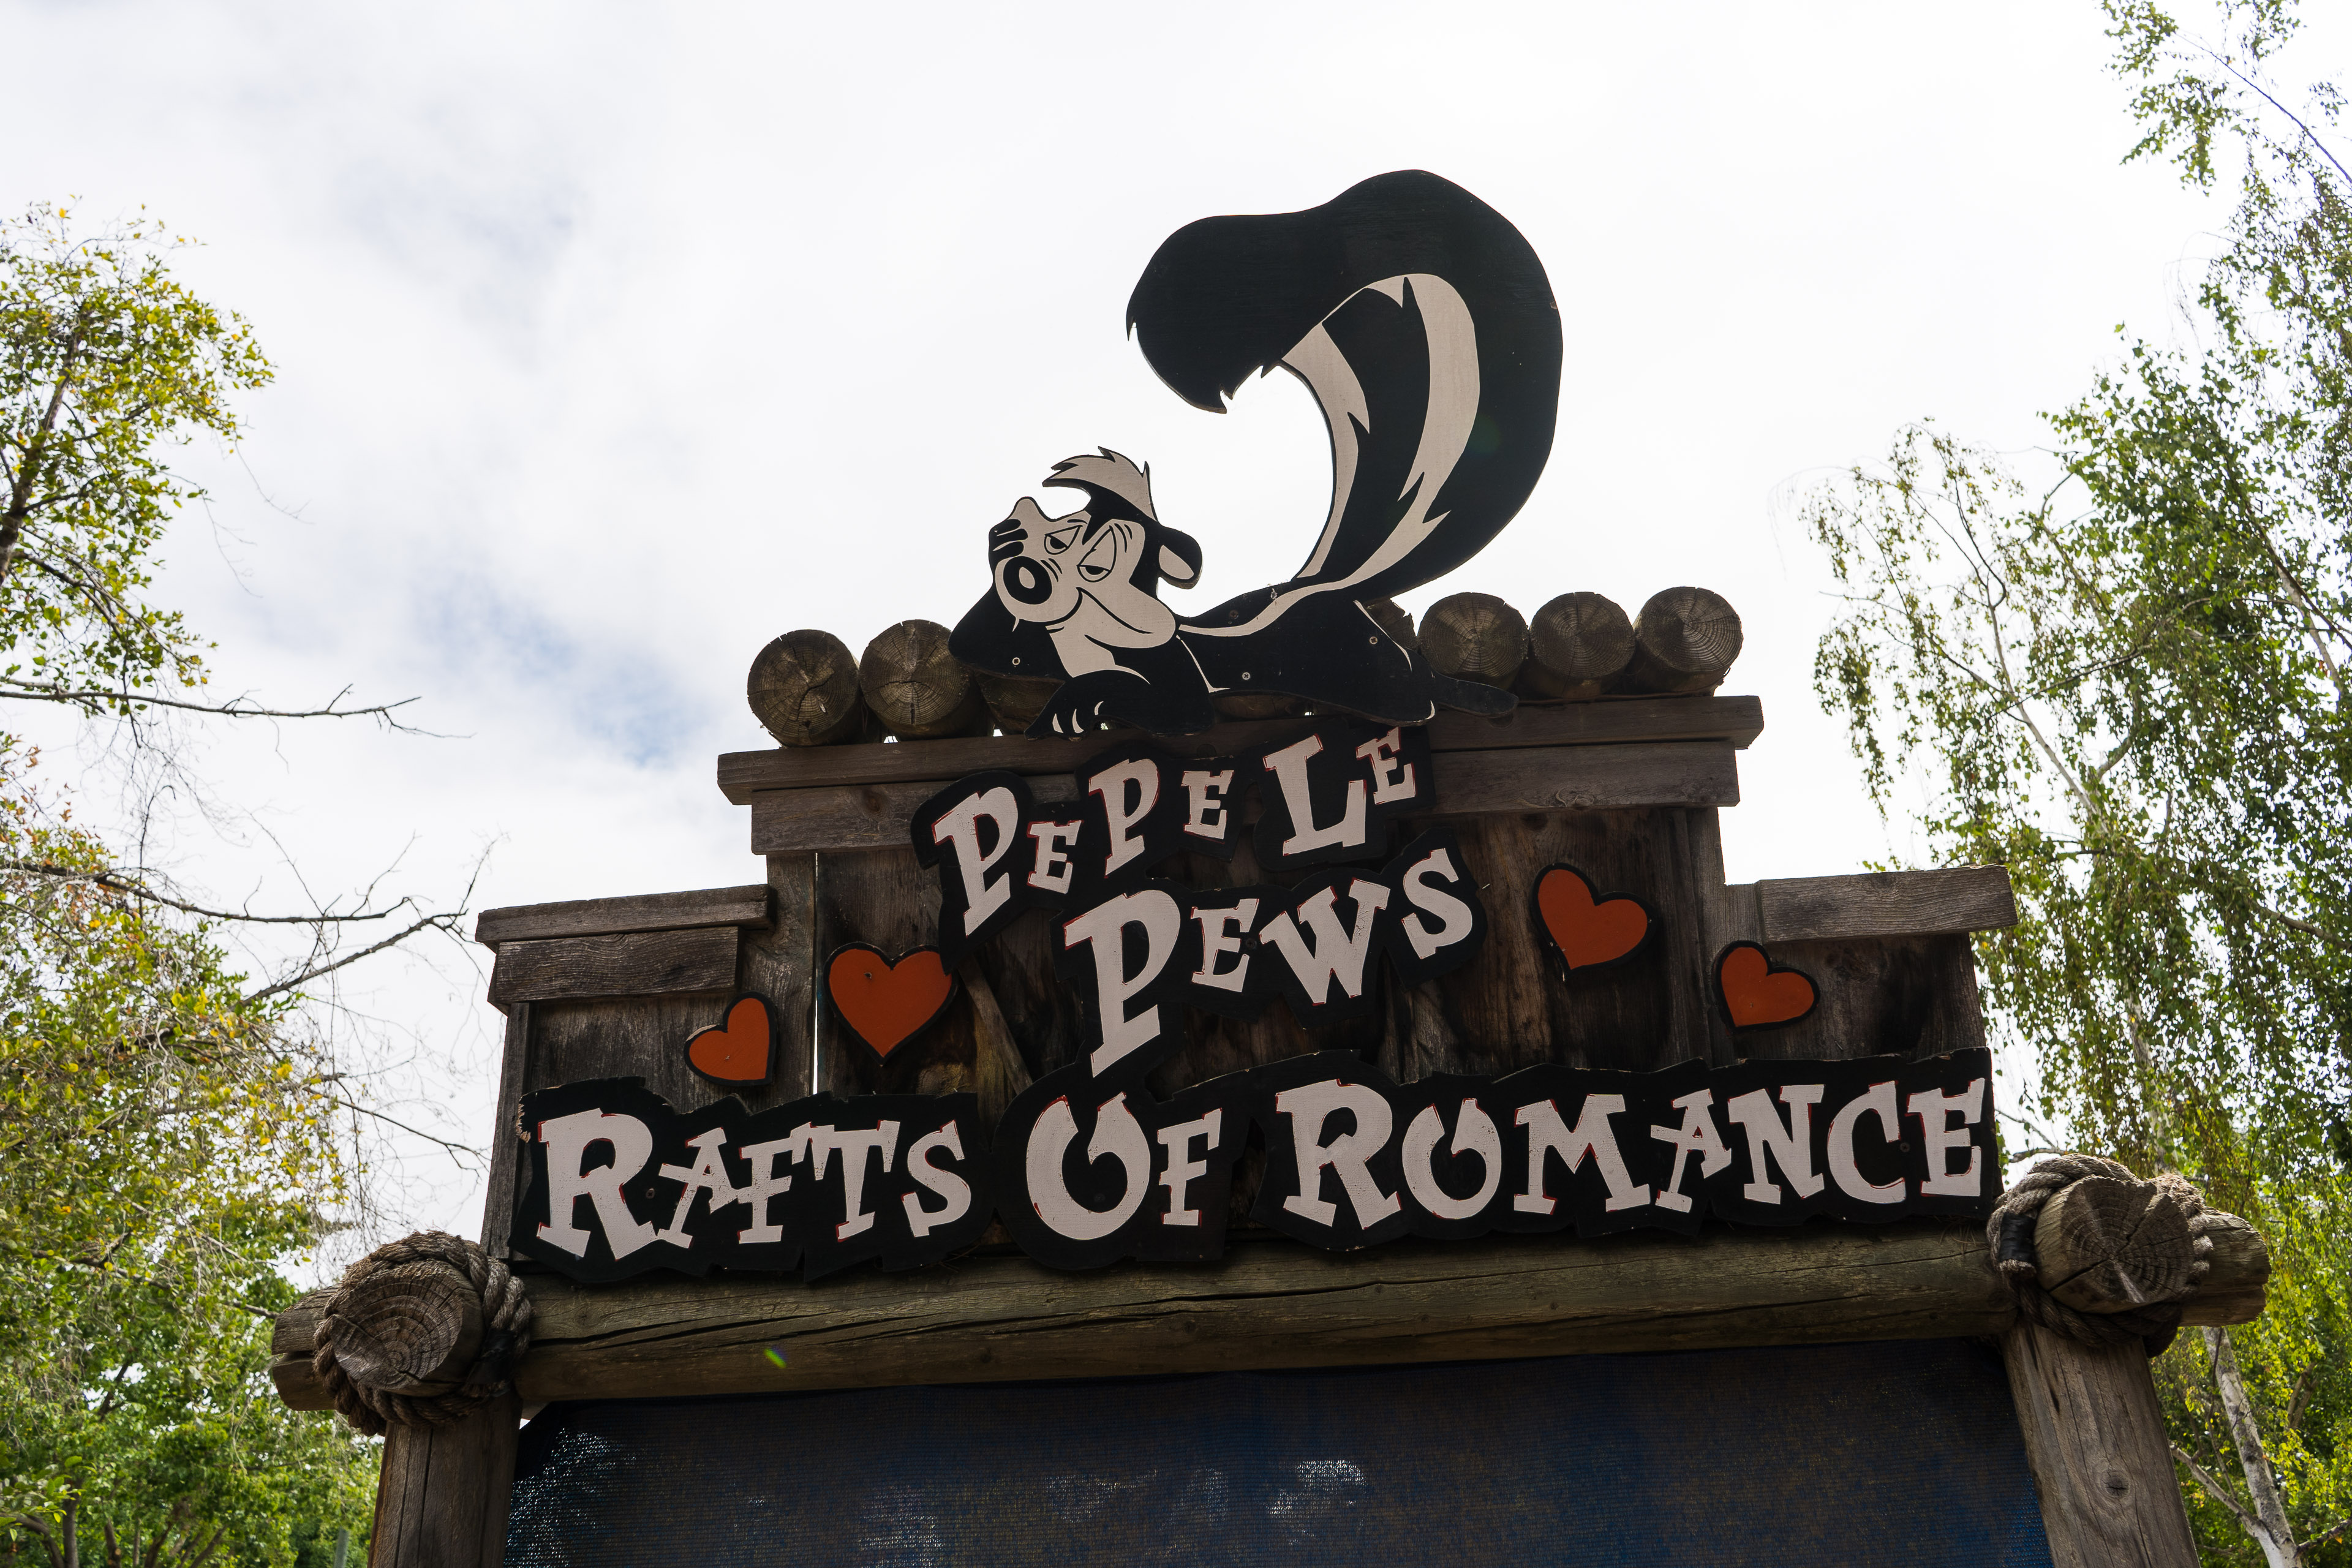 Pepe Le Pew's Rafts of Romance